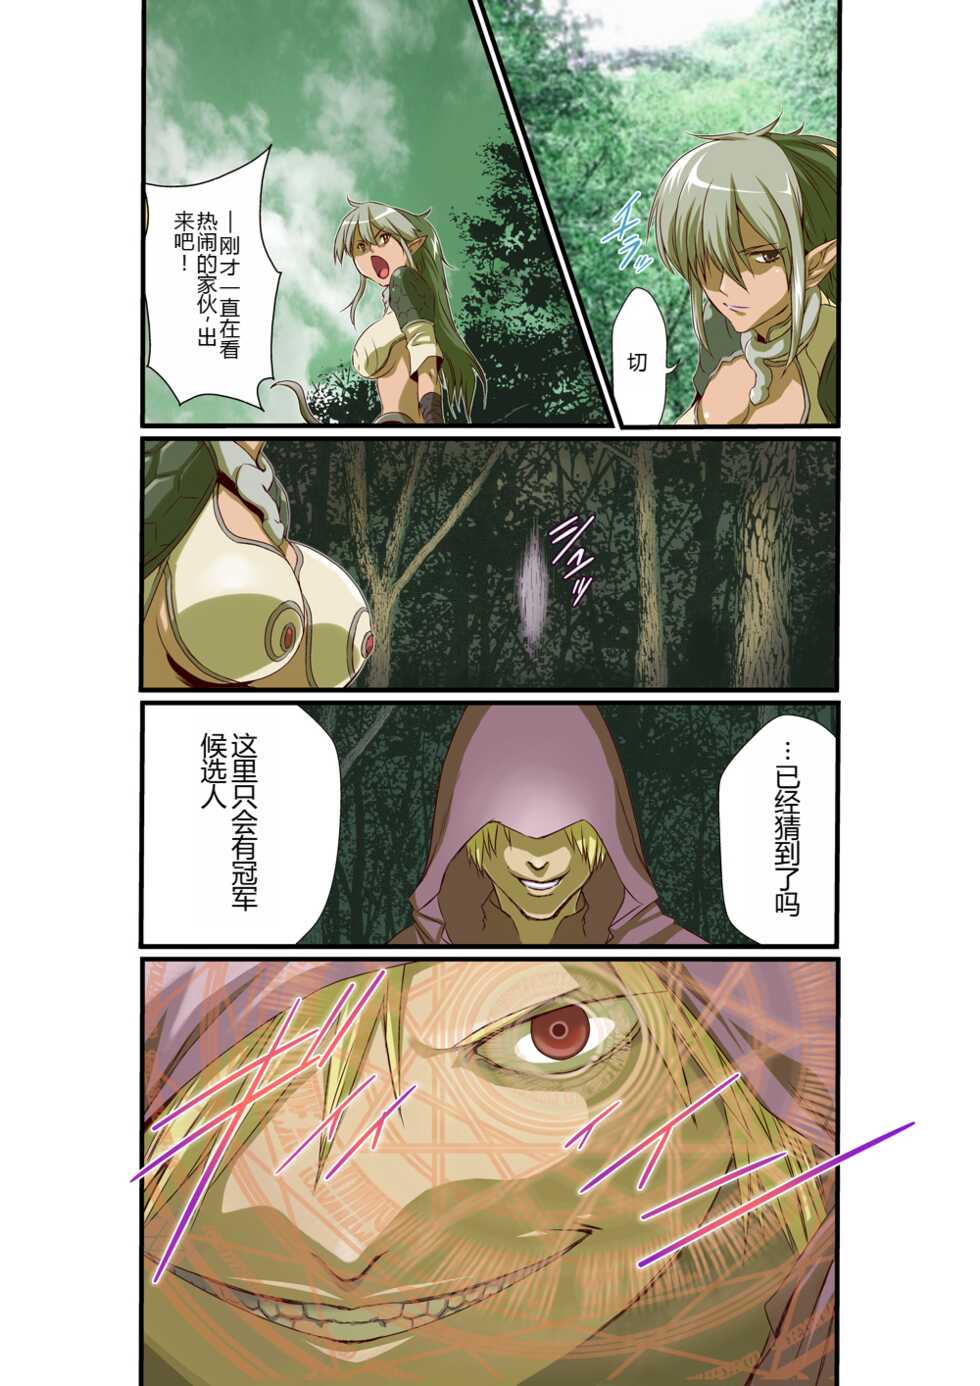 [Utsuro na Hitomi] Queen's *lade Mind-control Manga (Queen's Blade) [chinese] [lalala1234个人机翻汉化] - Page 10